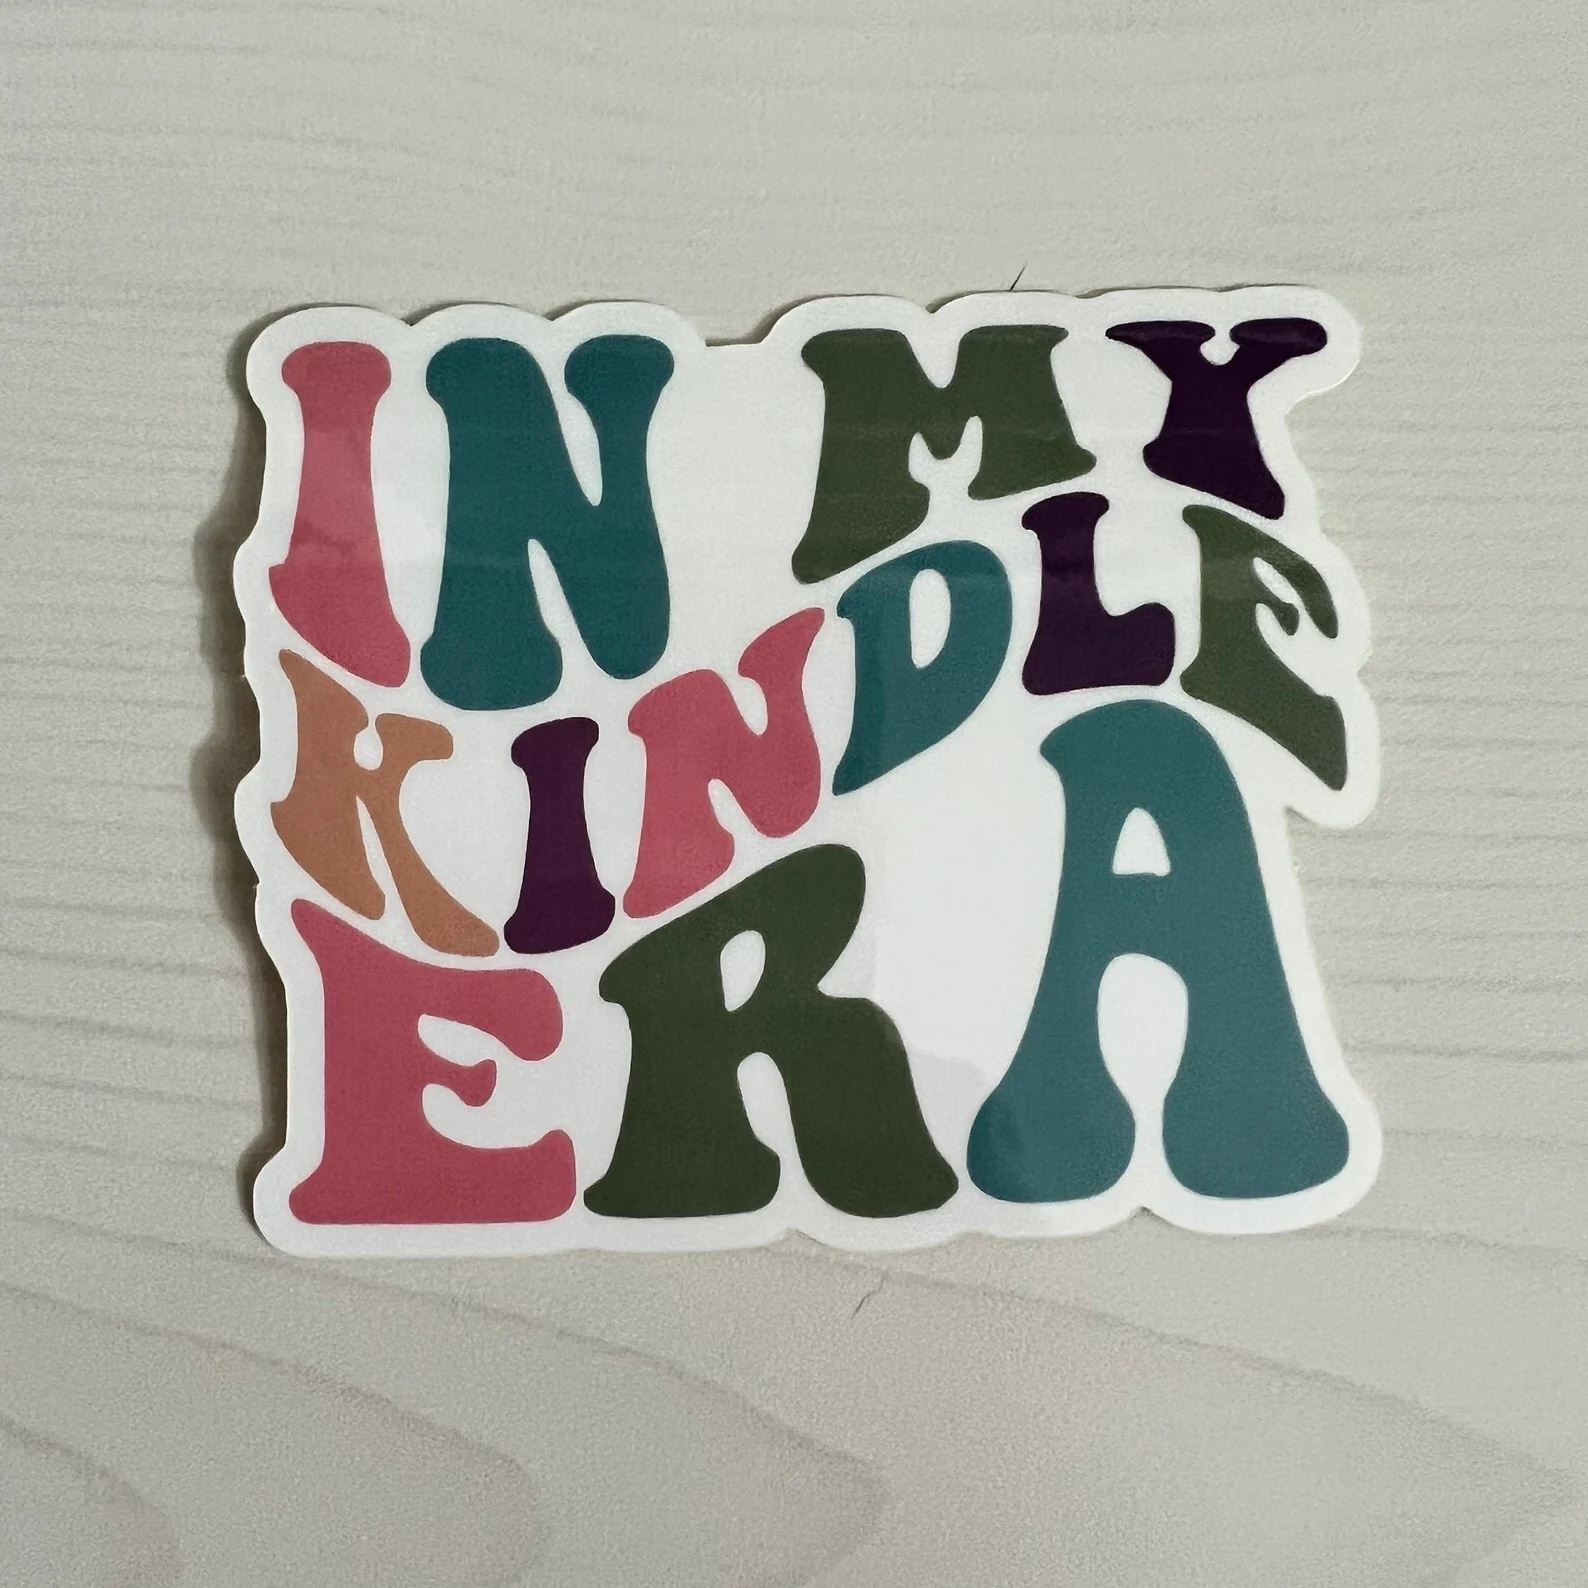 a photo of a sticker that says "In My Kindle Era"